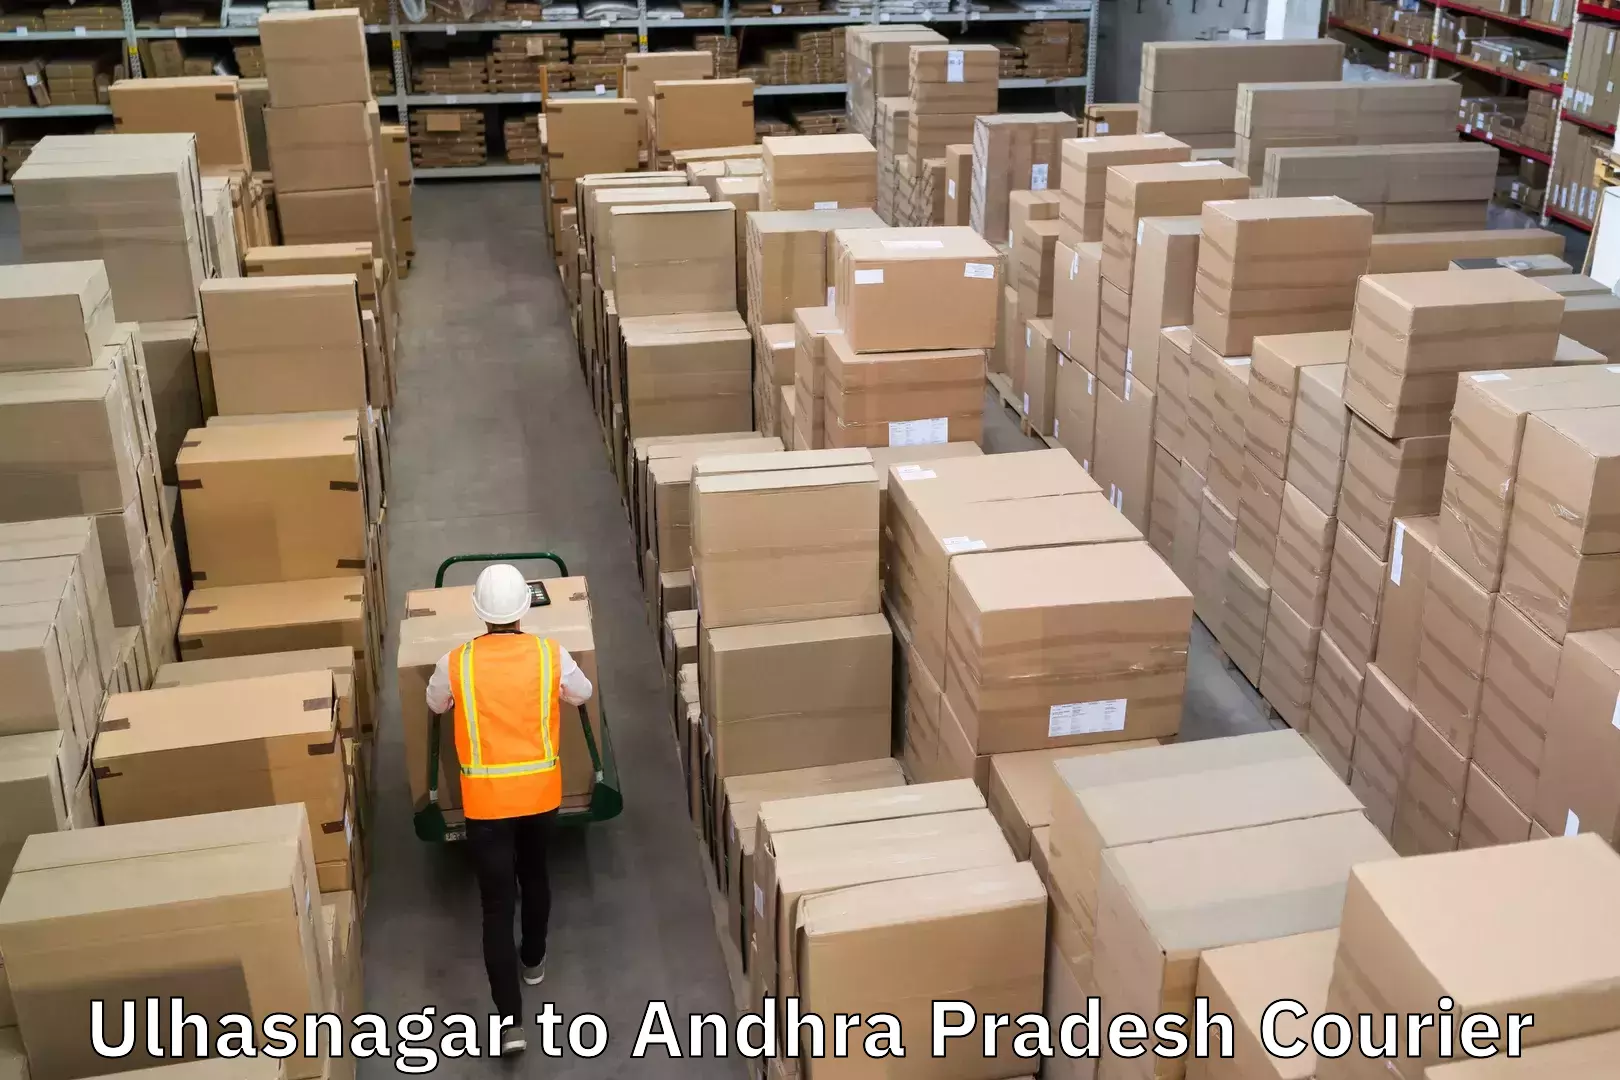 Subscription-based courier Ulhasnagar to Andhra Pradesh